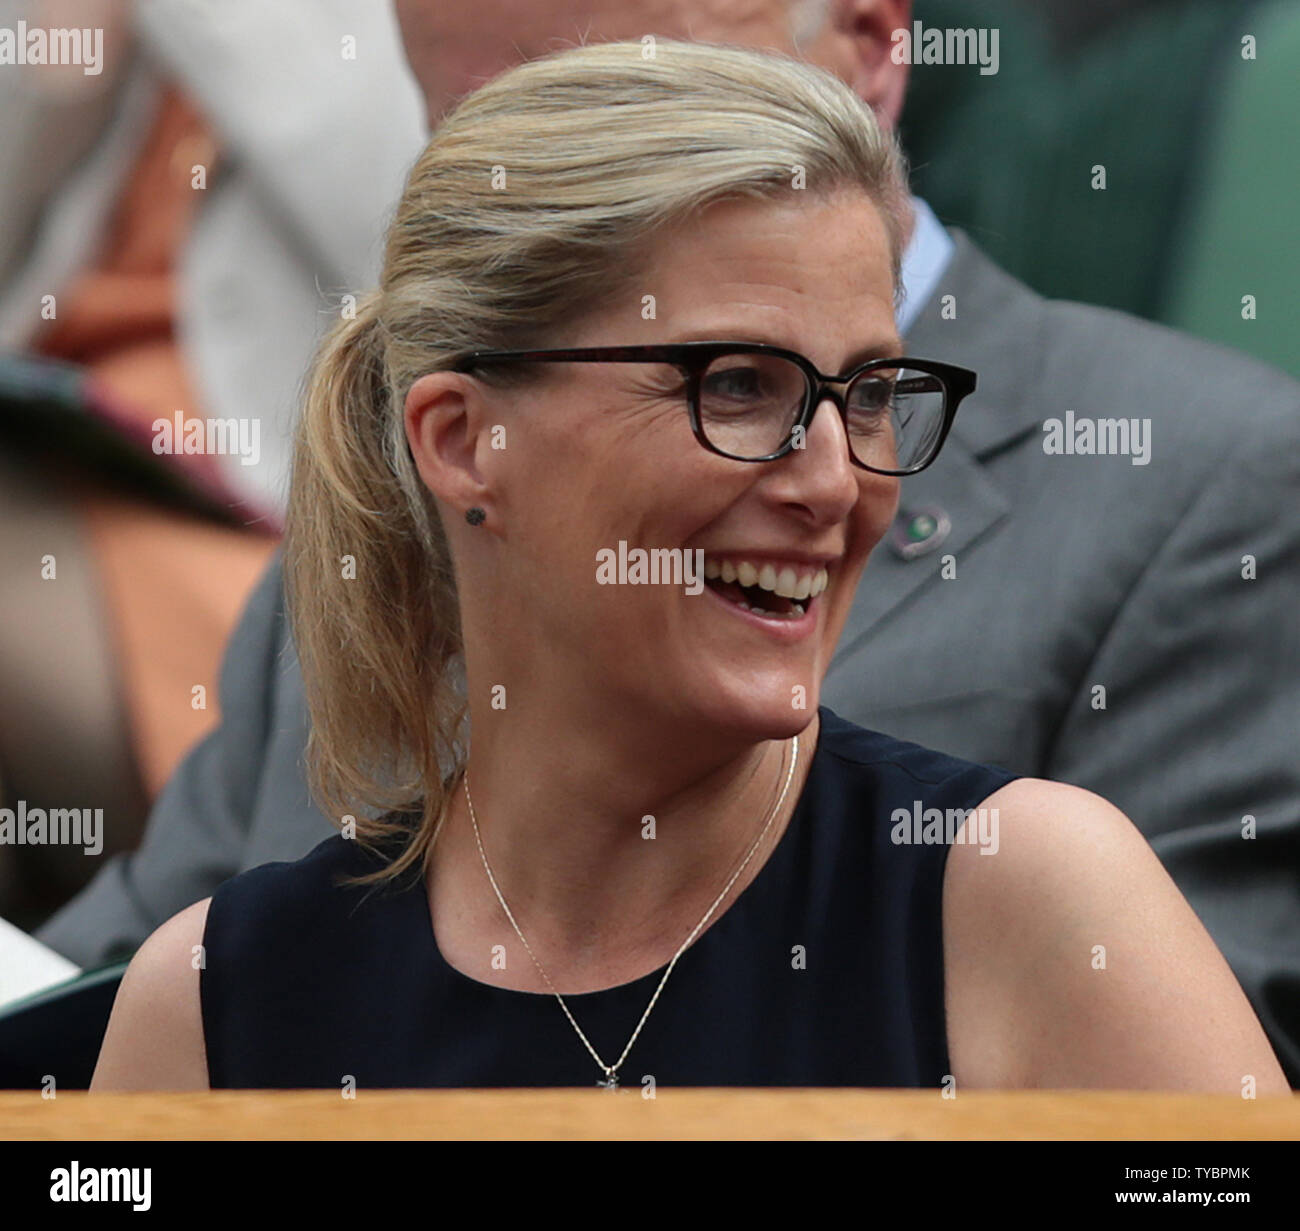 sophie-countess-of-wessex-watches-britains-andy-murray-in-his-match-against-south-african-kevin-anderson-on-day-seven-of-the-2014-wimbledon-championships-in-london-on-june-30-2014-upihugo-philpott-TYBPMK.jpg